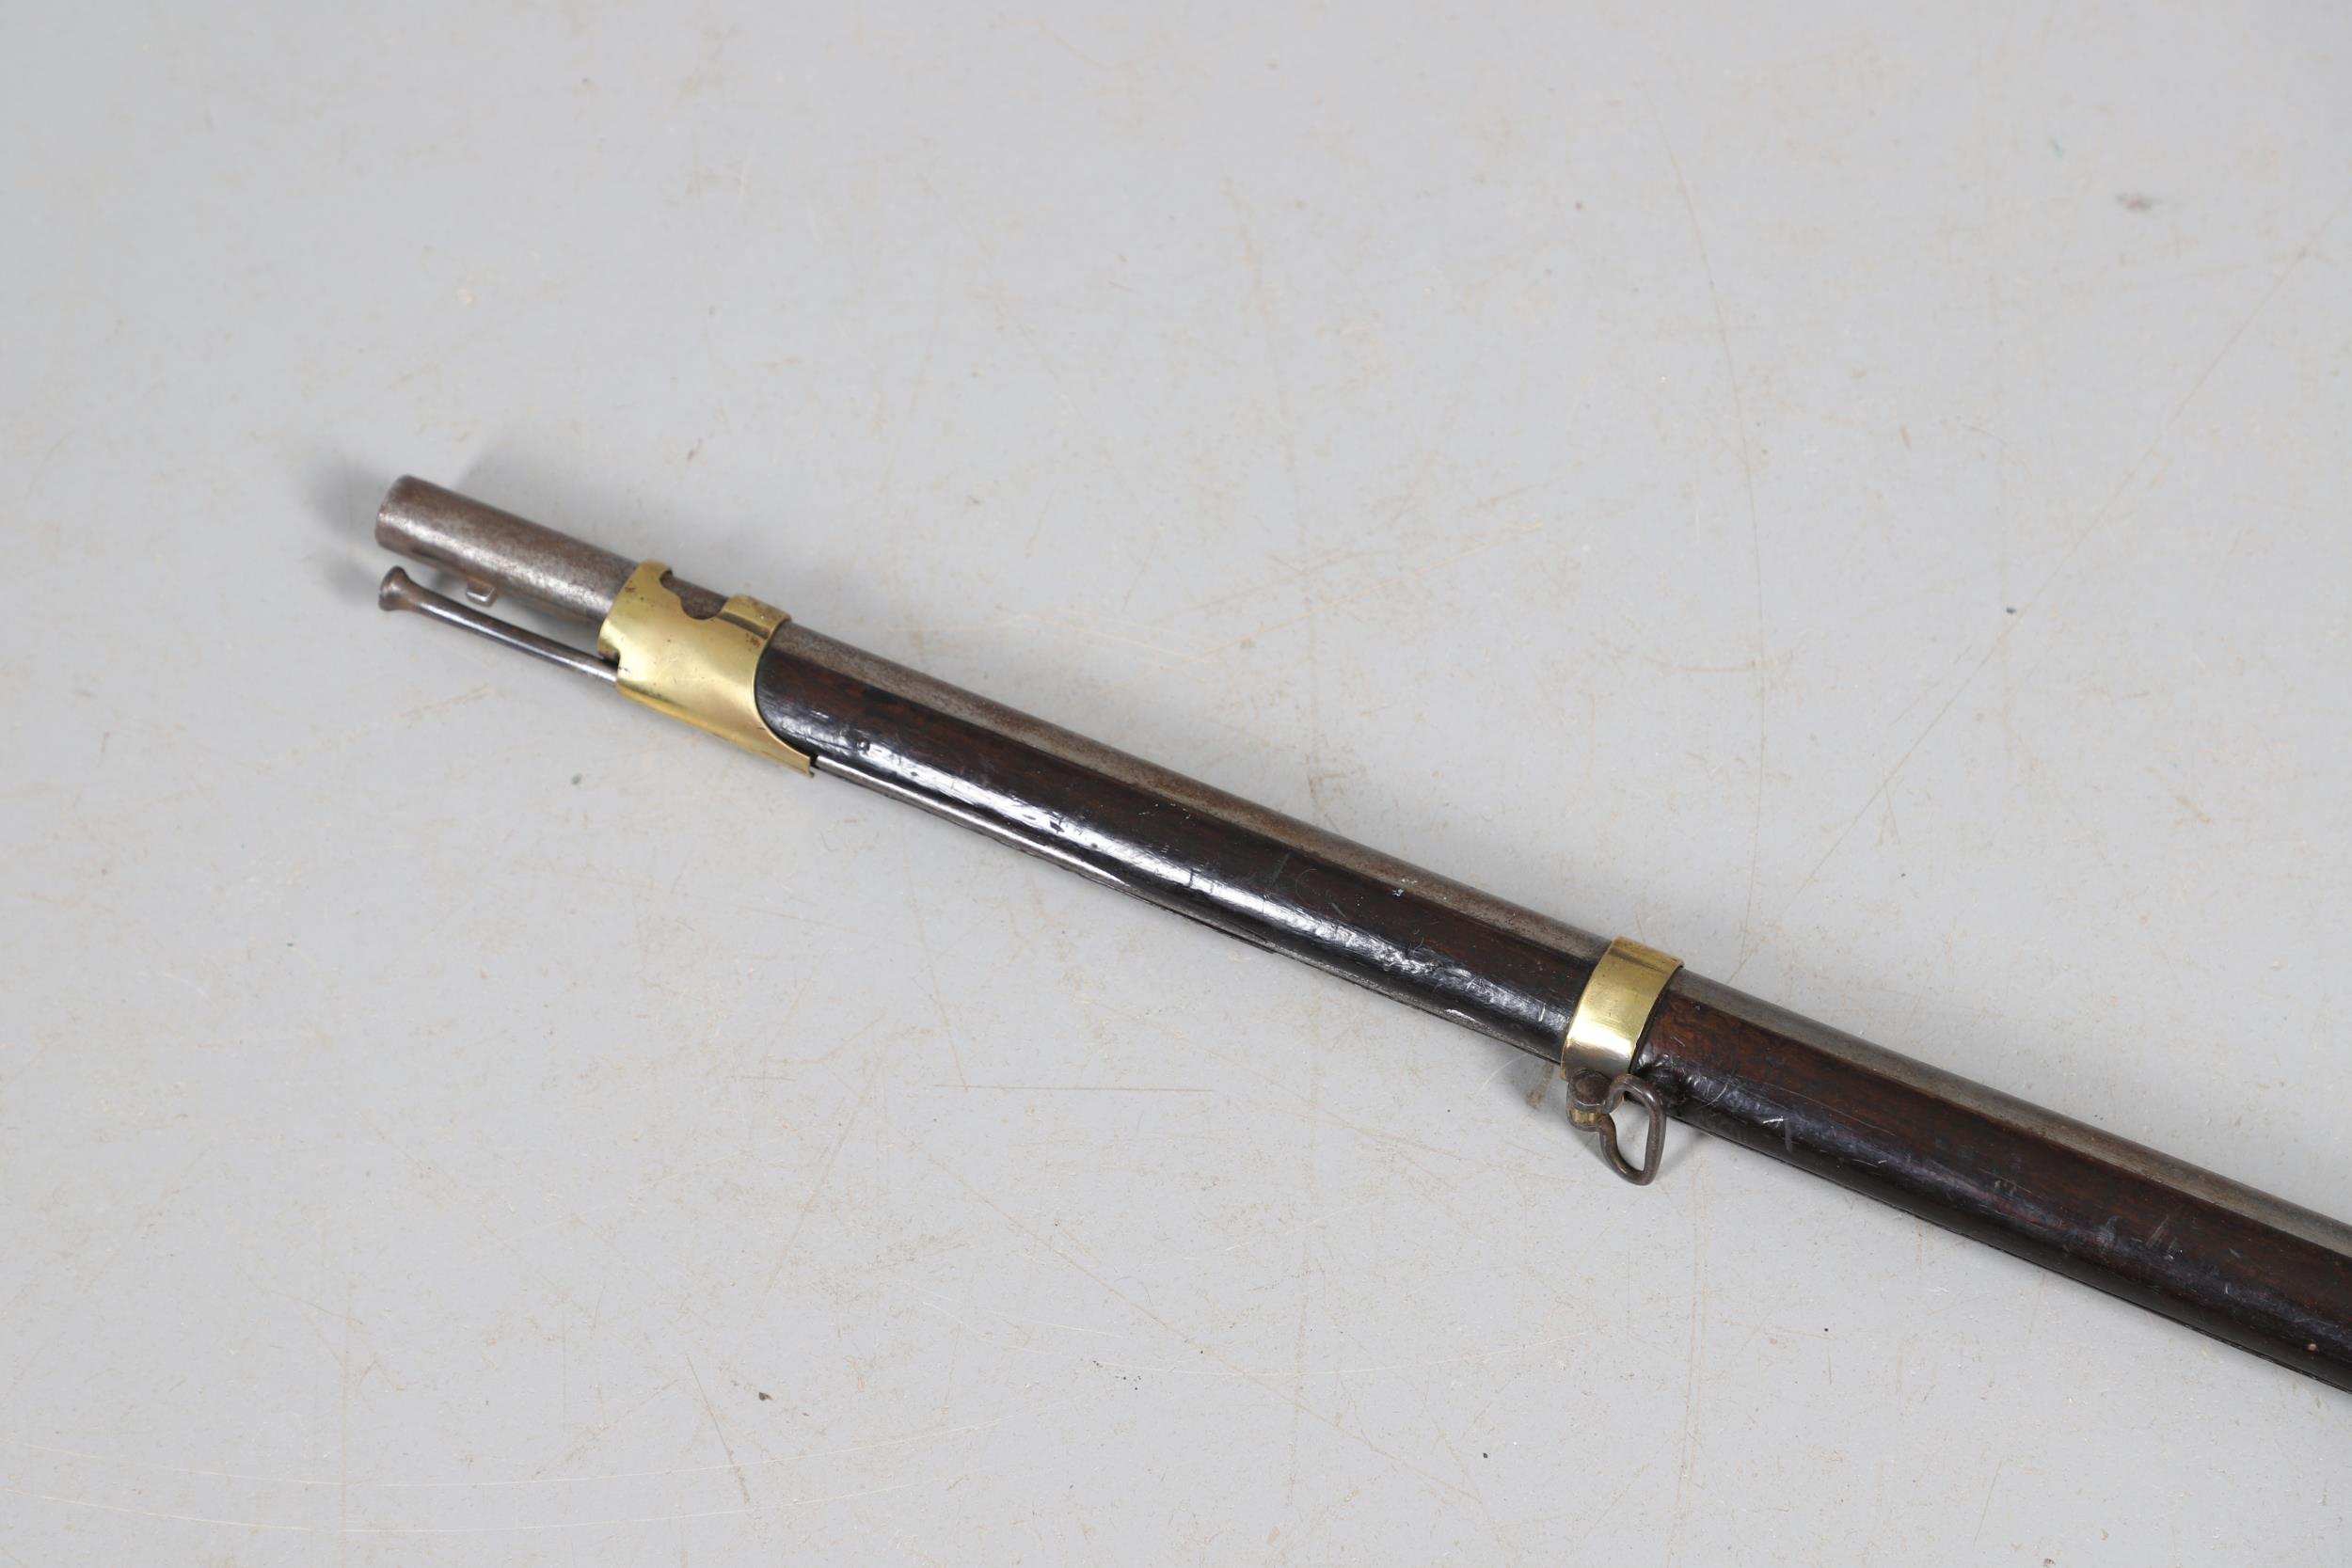 AN UNUSUAL MID 19TH CENTURY BAVARIAN ROYAL ARMY CADET'S PERCUSSION MUSKET. - Image 10 of 13